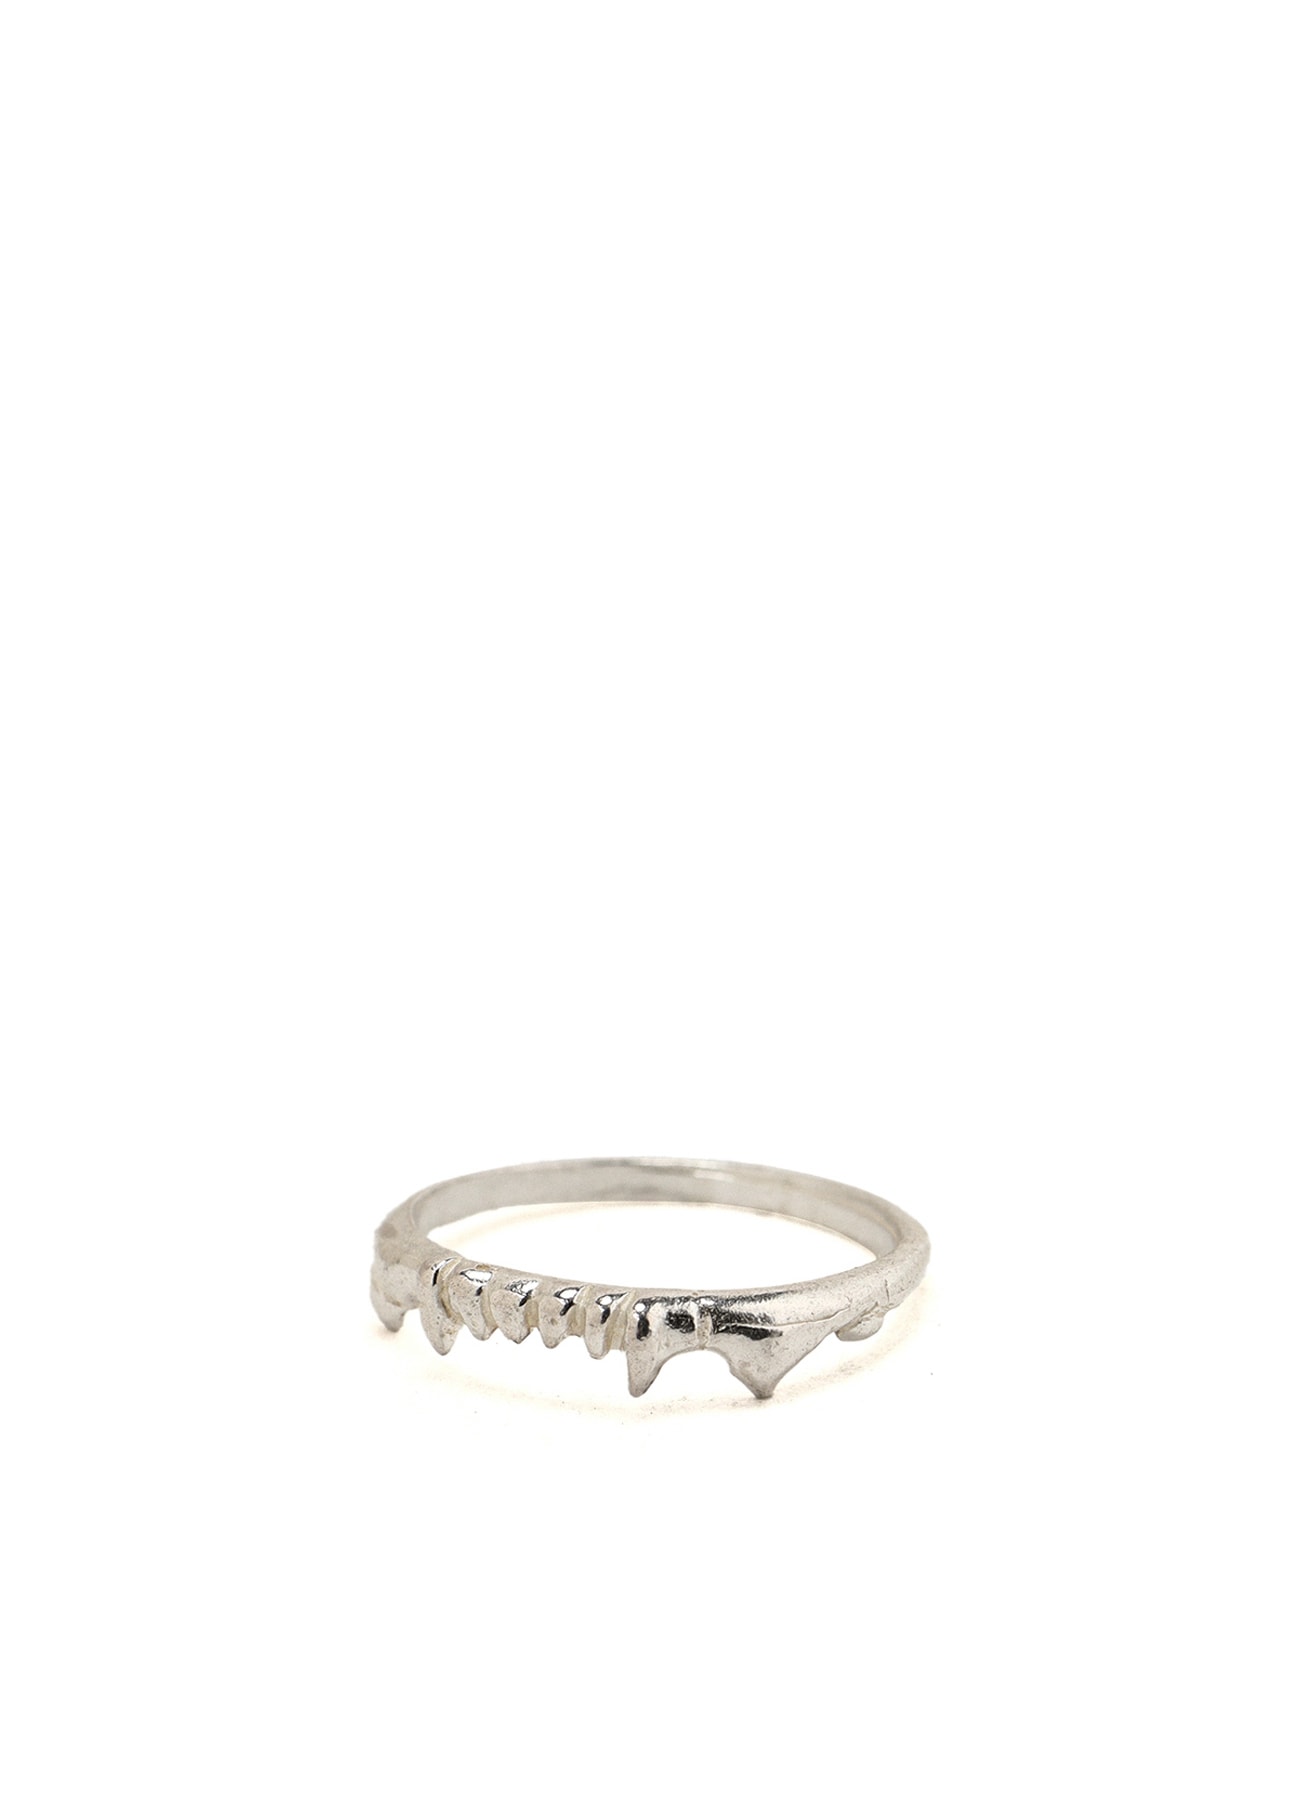 SILVER925 DOG TOOTH RING